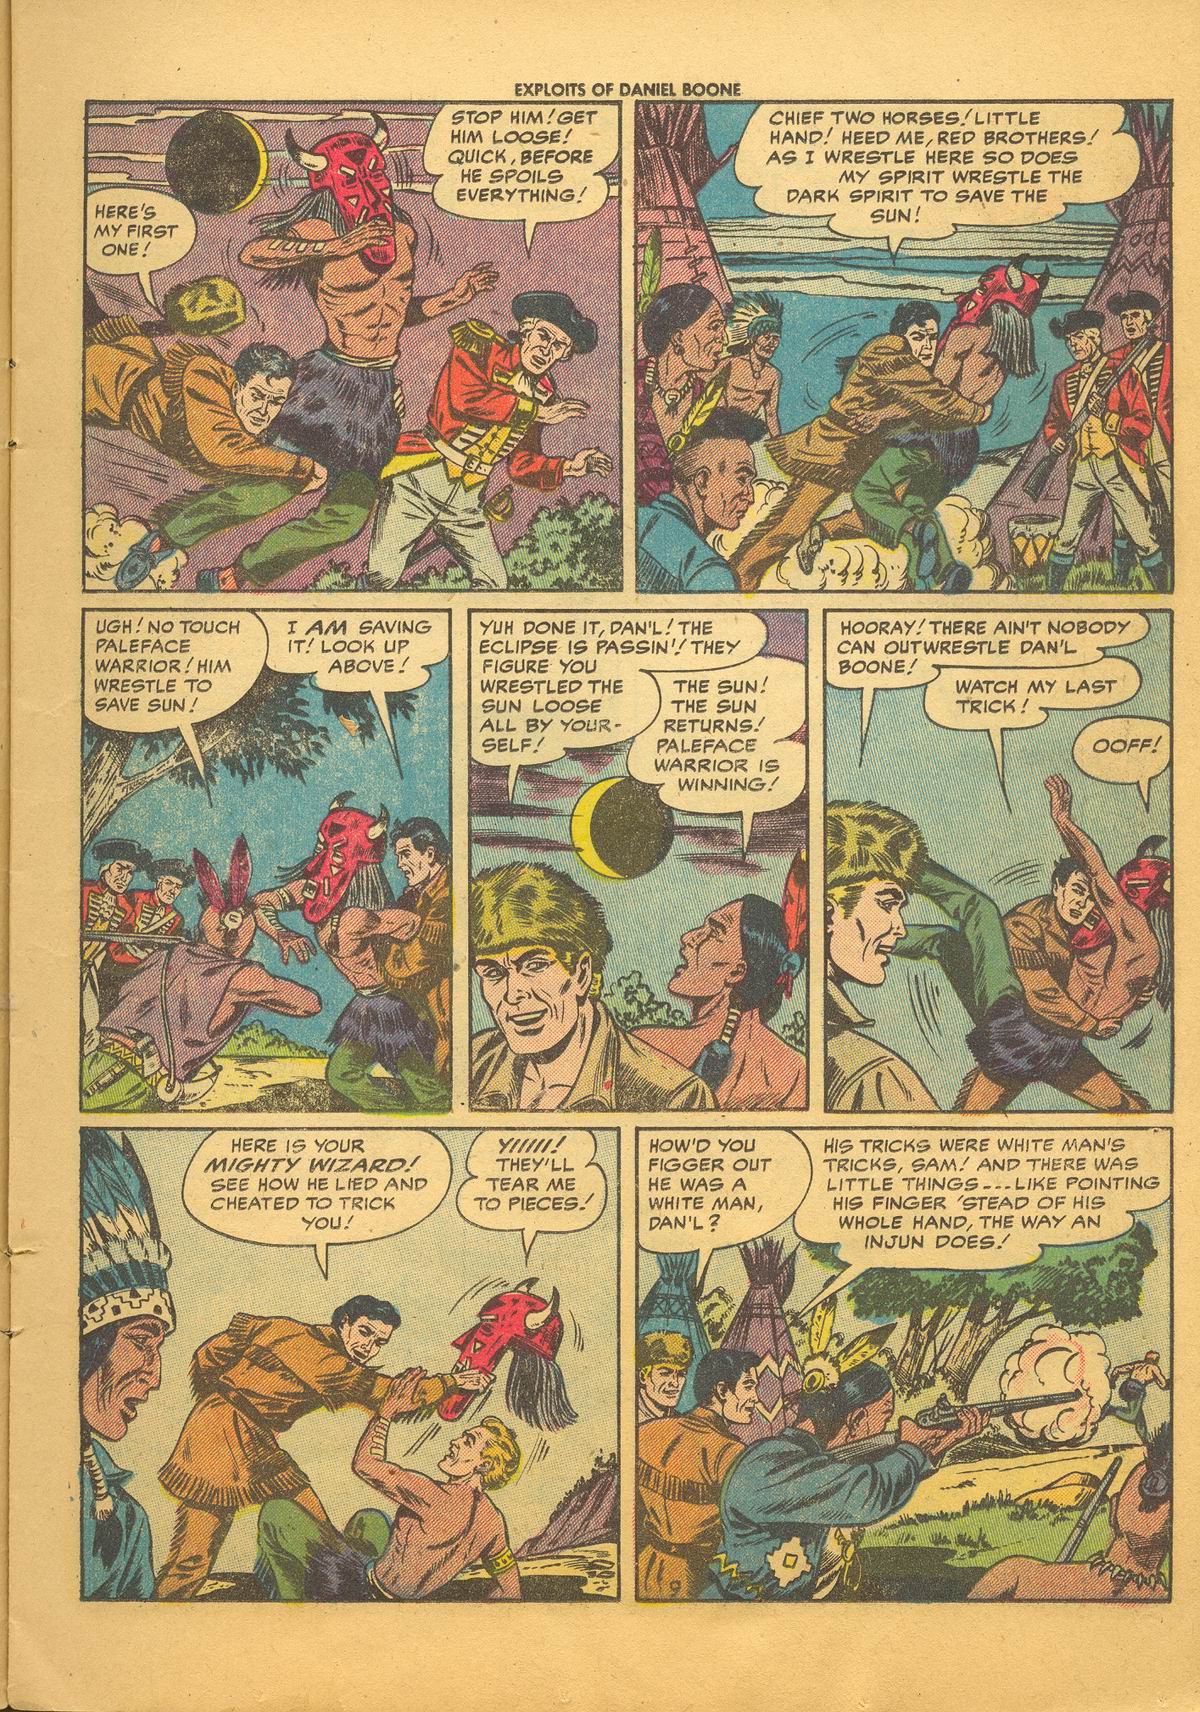 Read online Exploits of Daniel Boone comic -  Issue #4 - 11